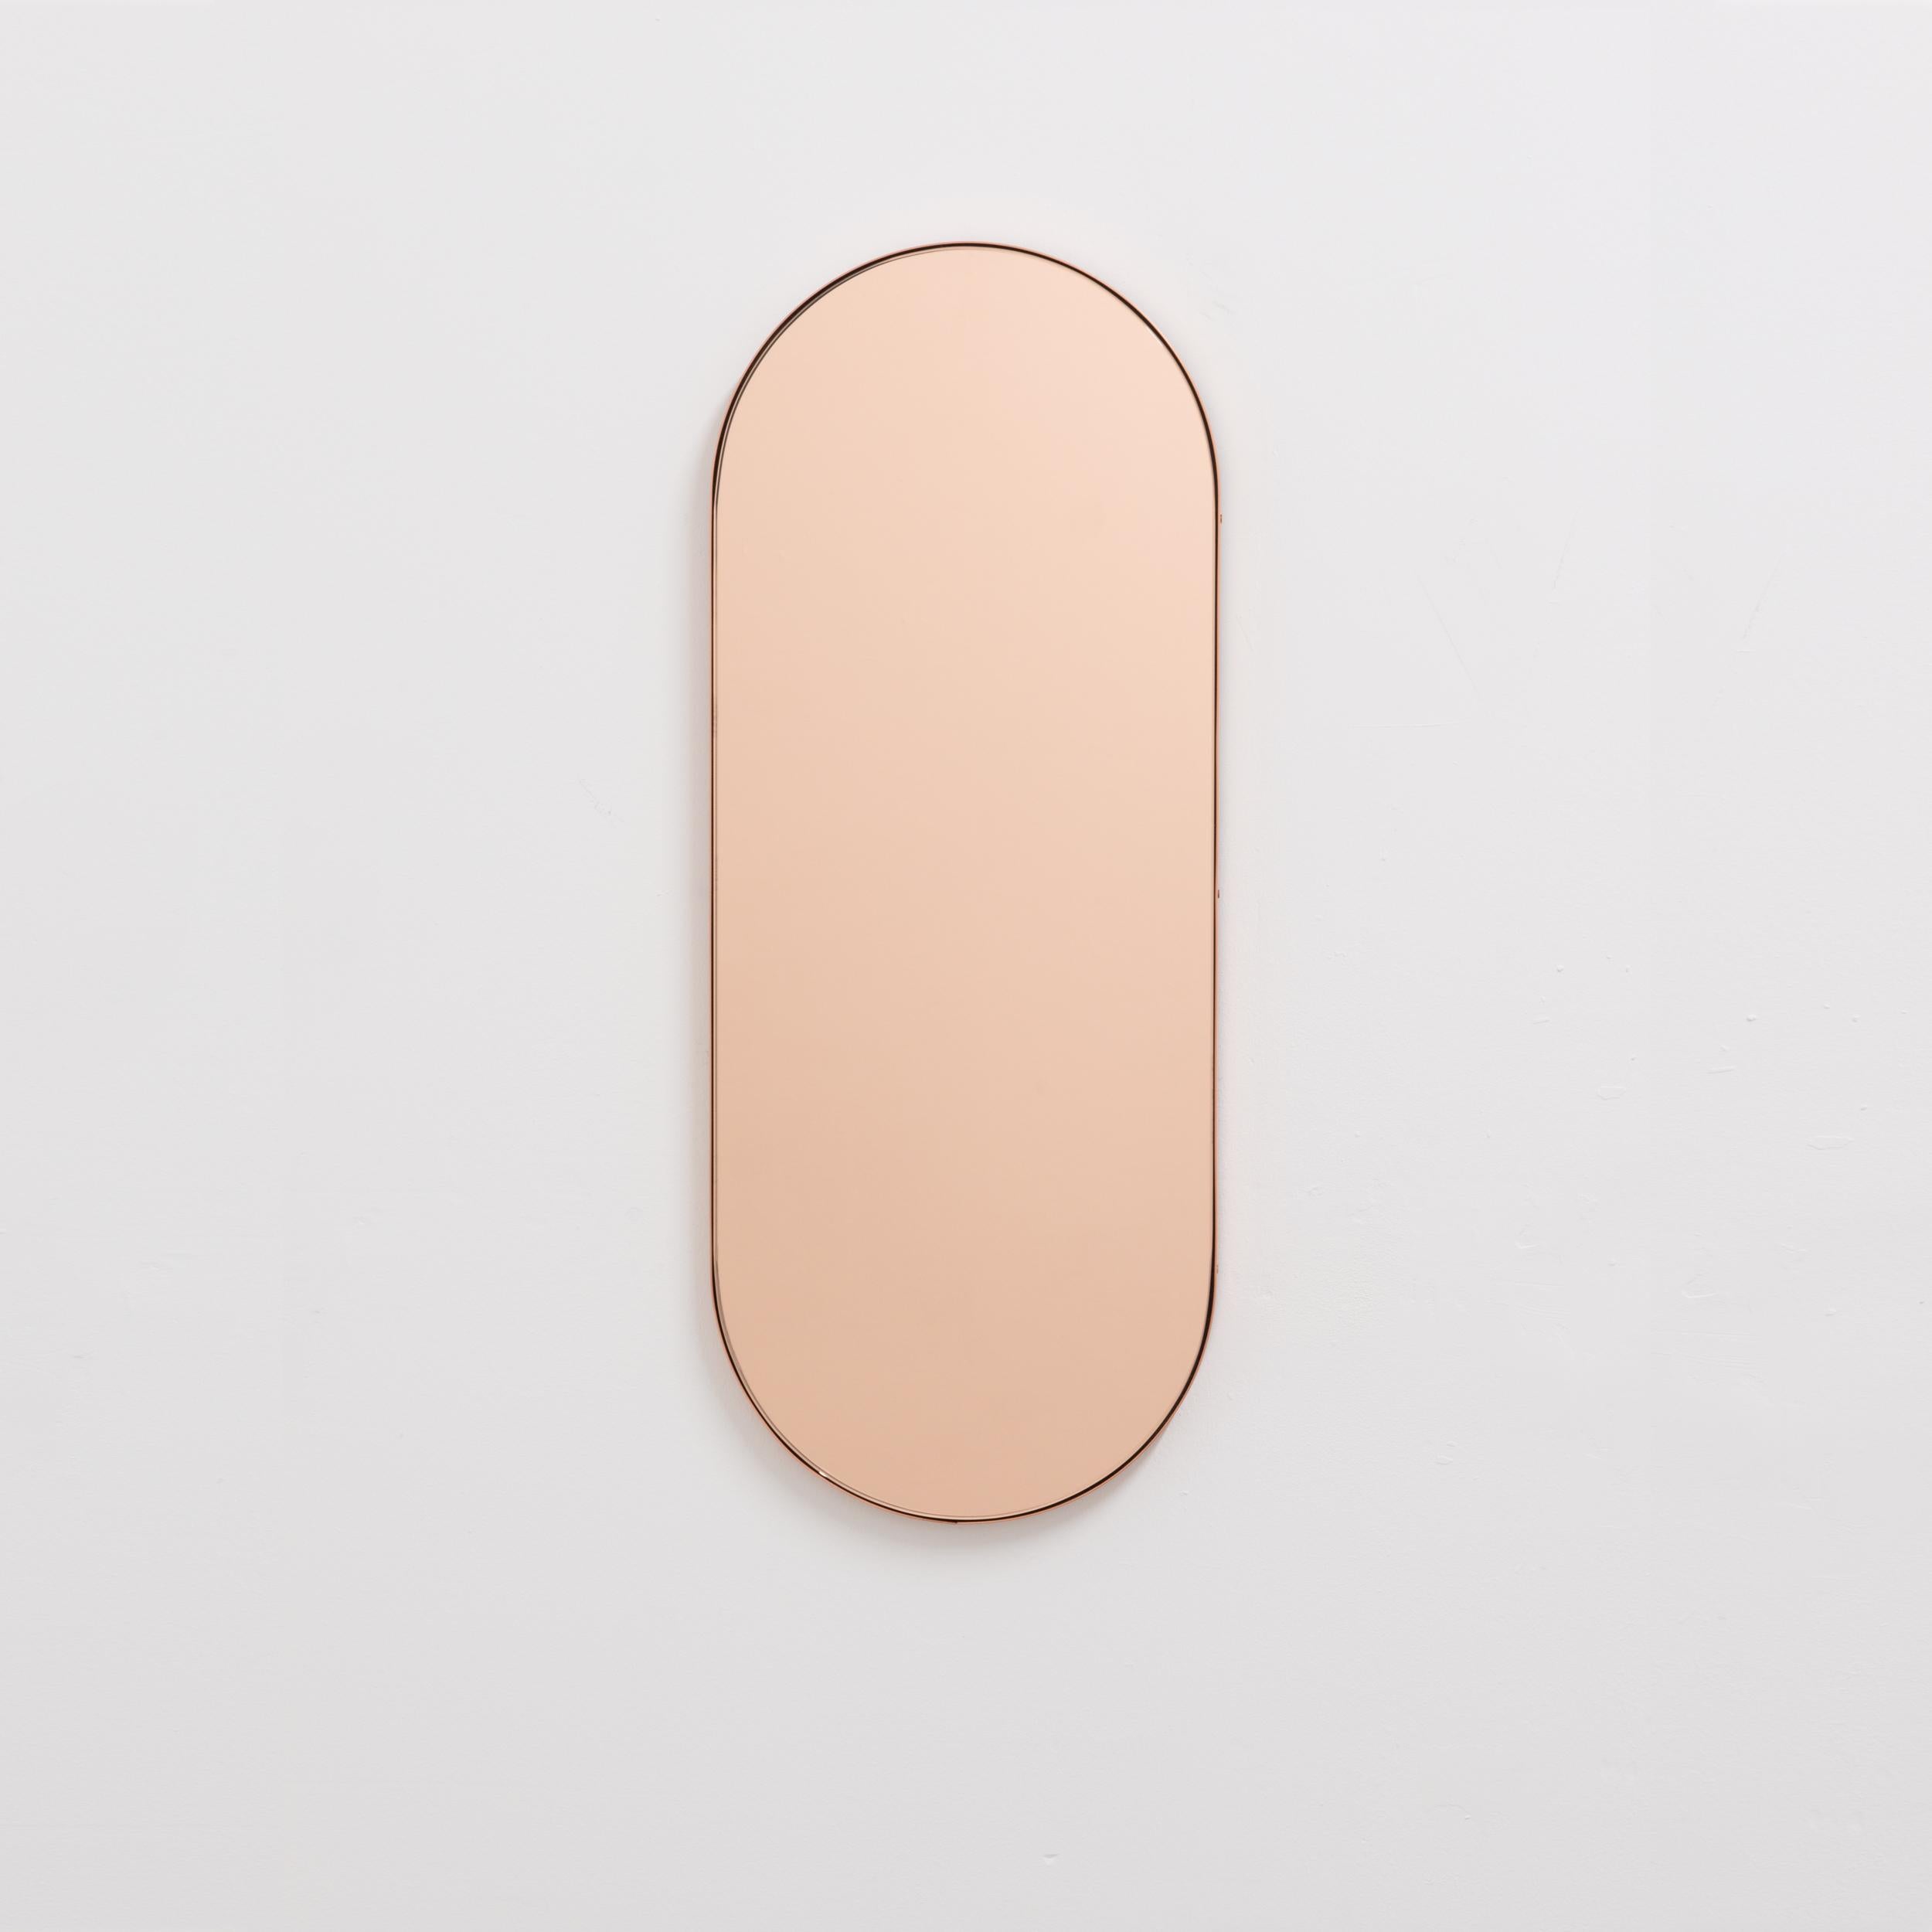 Capsula Capsule Shaped Rose Gold Mirror with Copper Frame, Medium For Sale 1